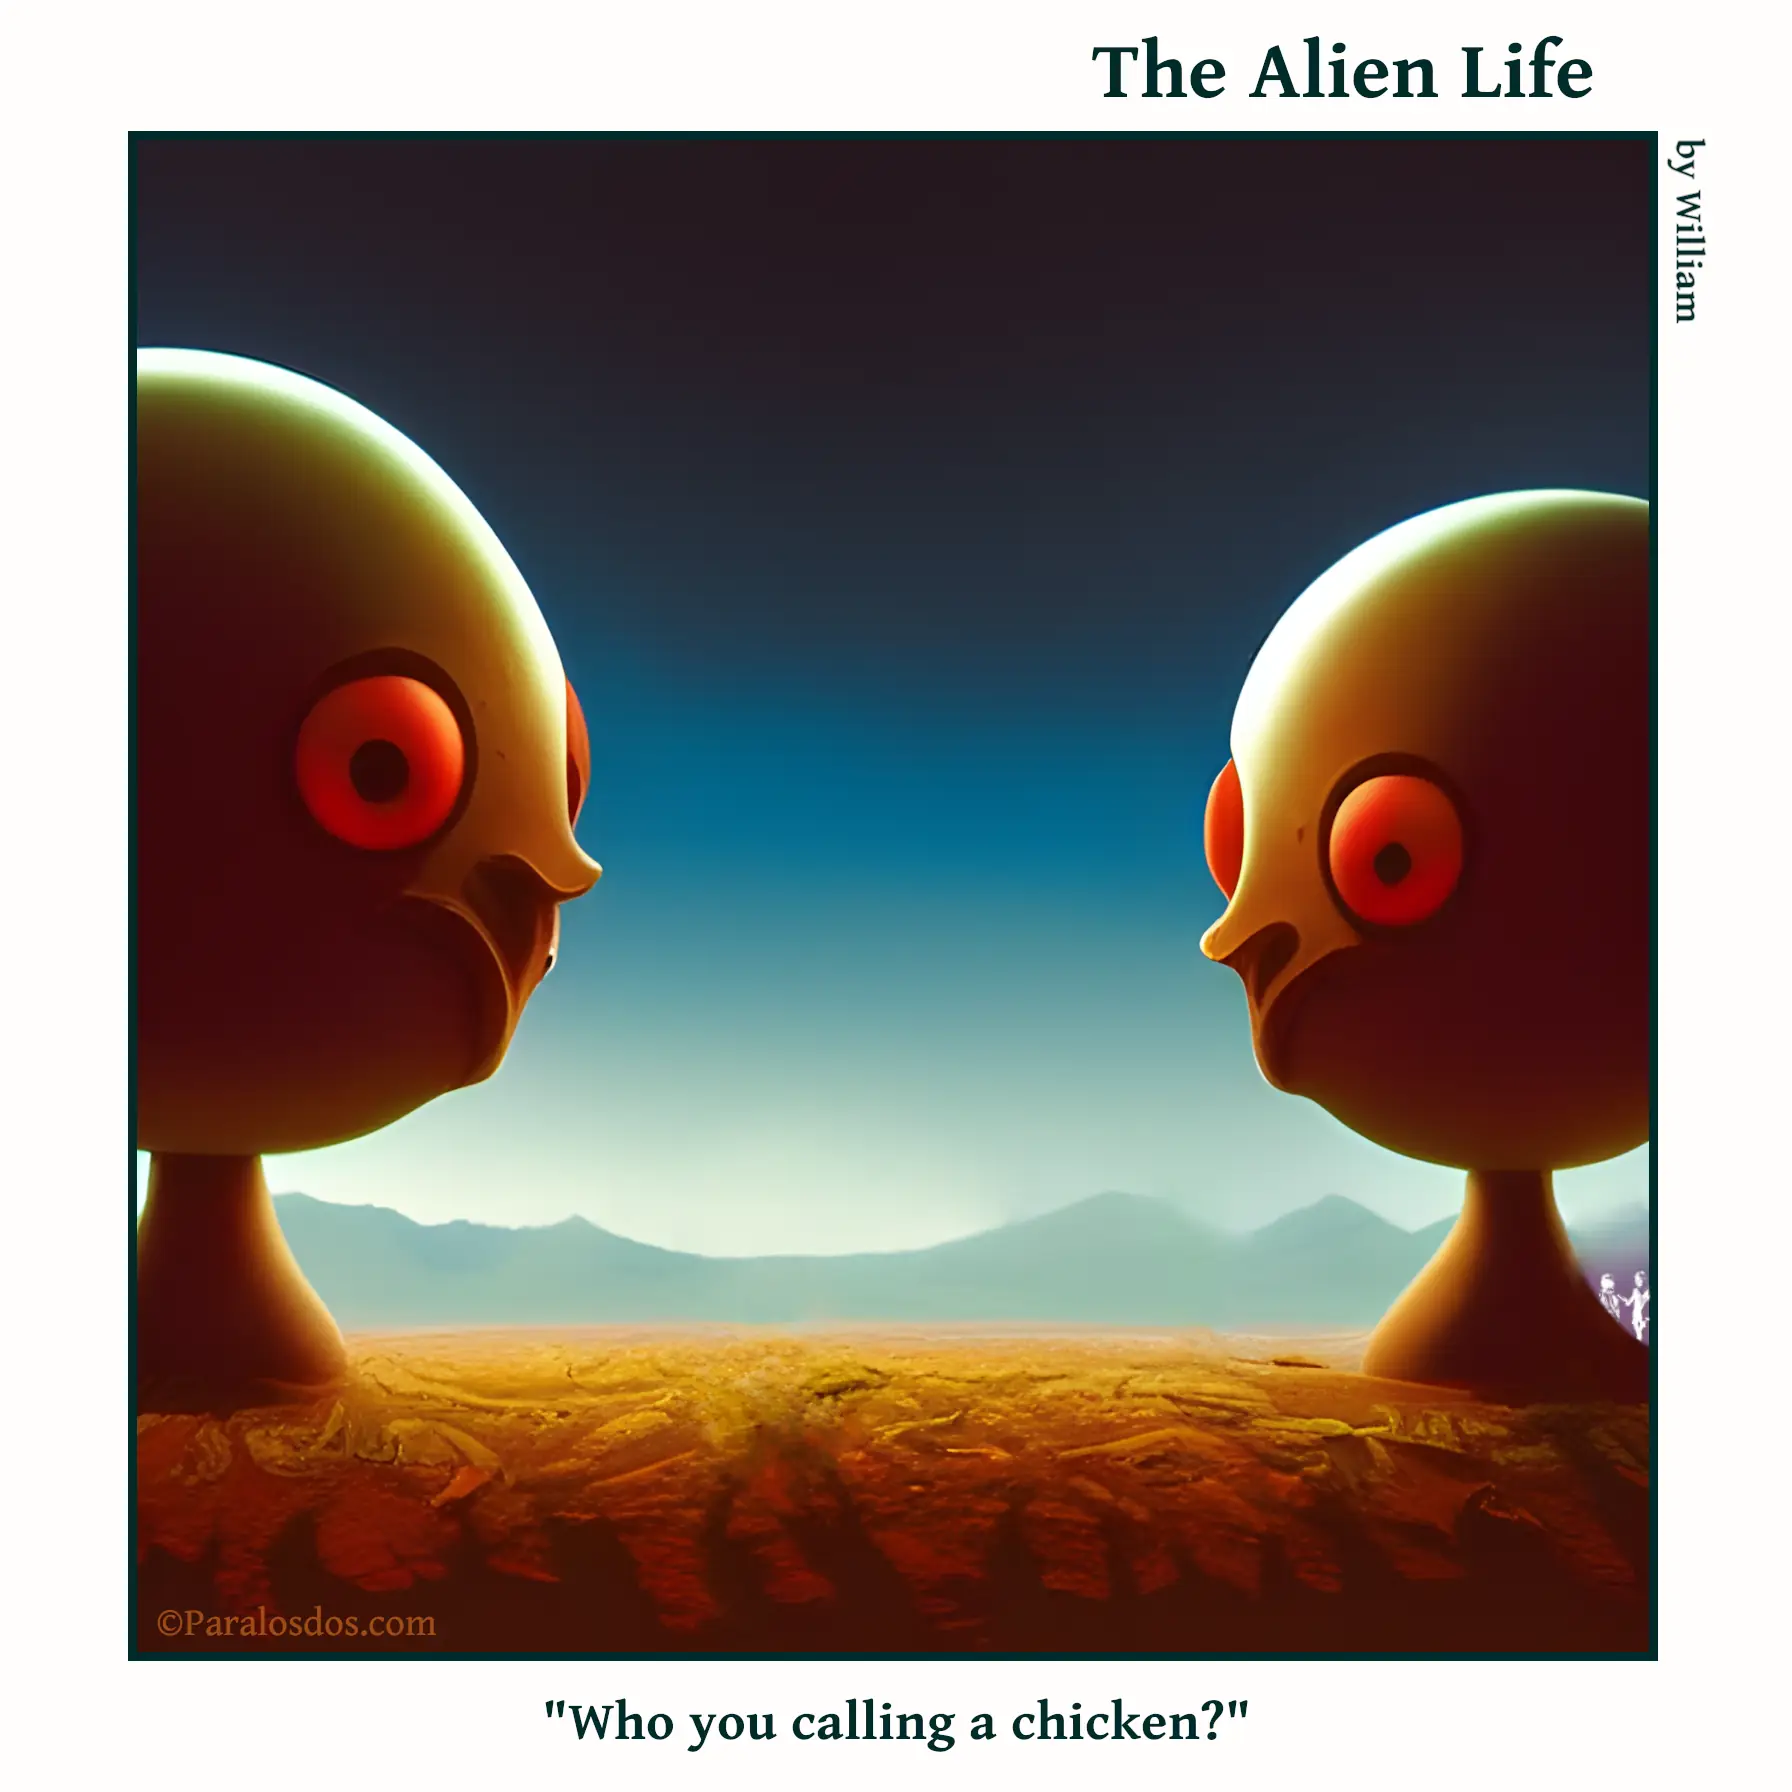 The Alien Life, one panel Comic. Two weird looking chicken-like creatures are facing each other. The caption reads: "Who you calling a chicken?"